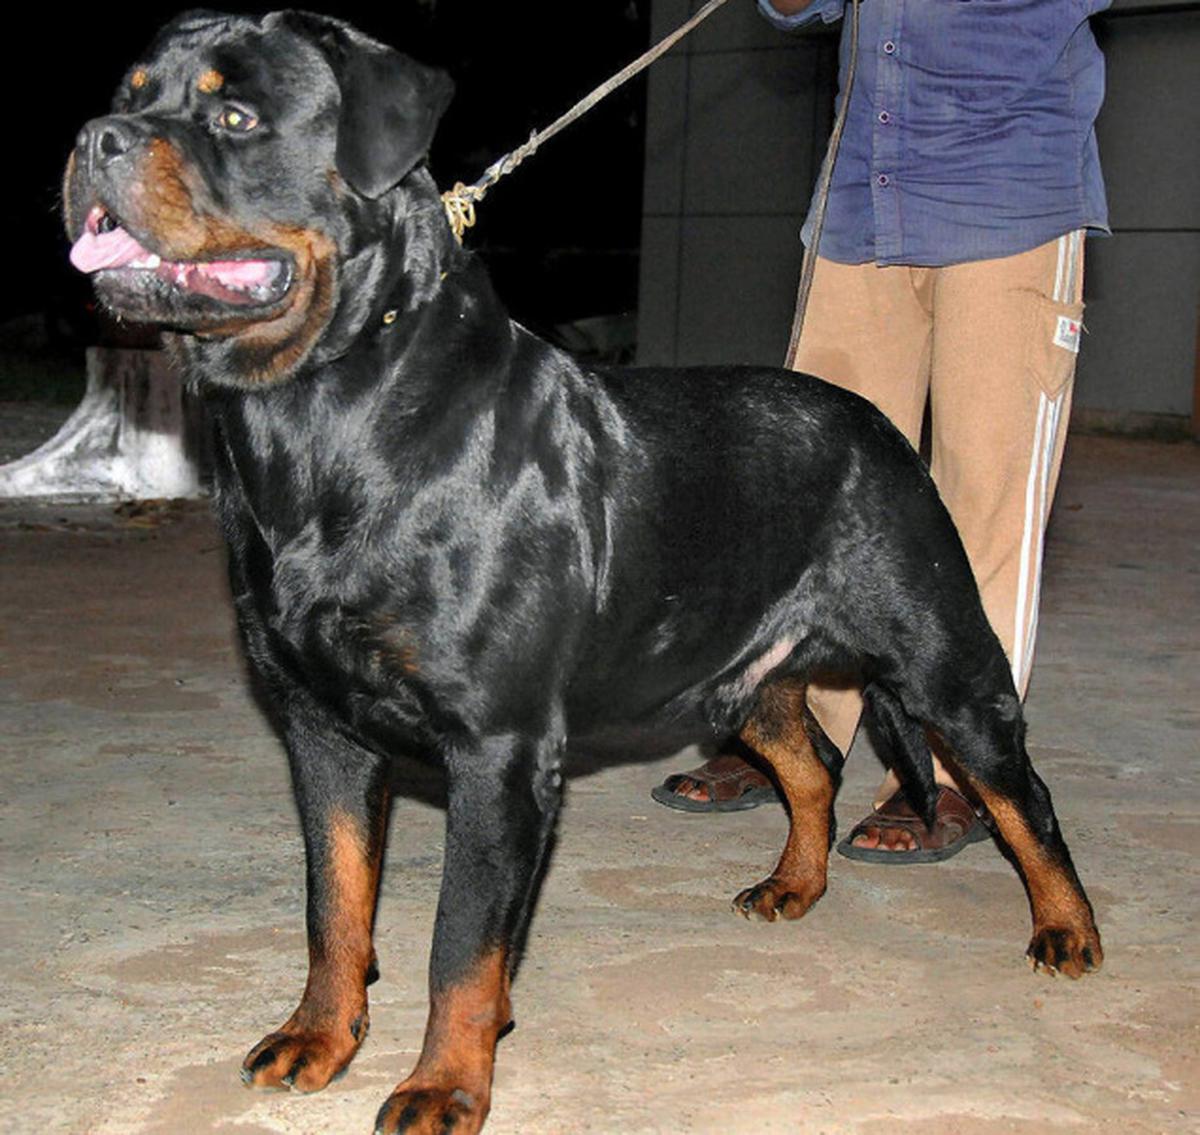 Extra care needed to train Rottweilers' - The Hindu